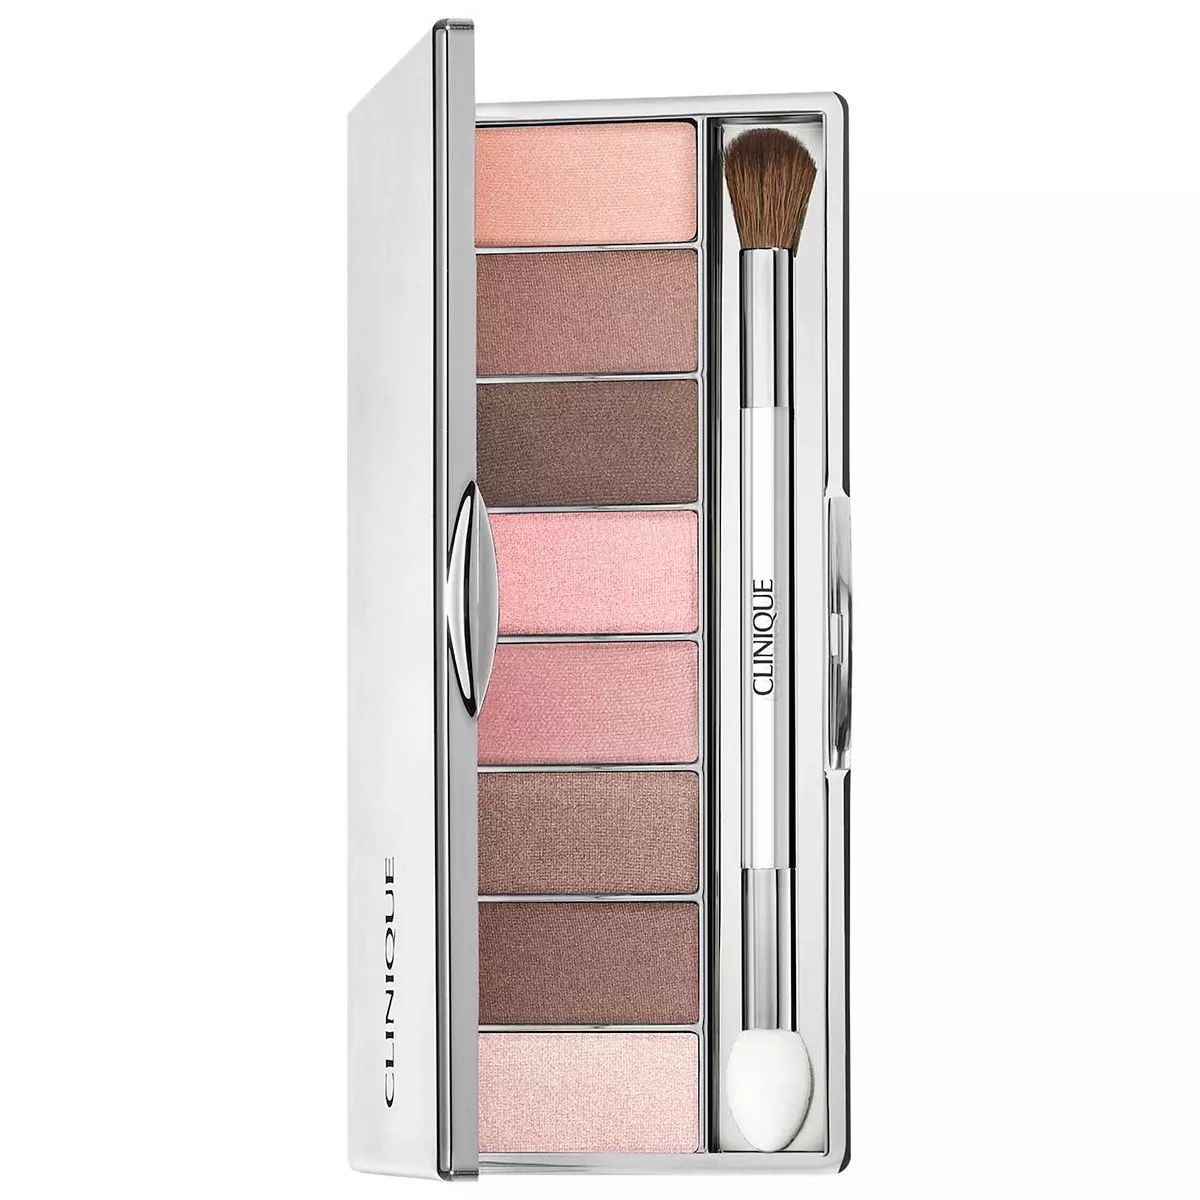 CLINIQUE All About Shadow 8-Pan Palette | Kohl's